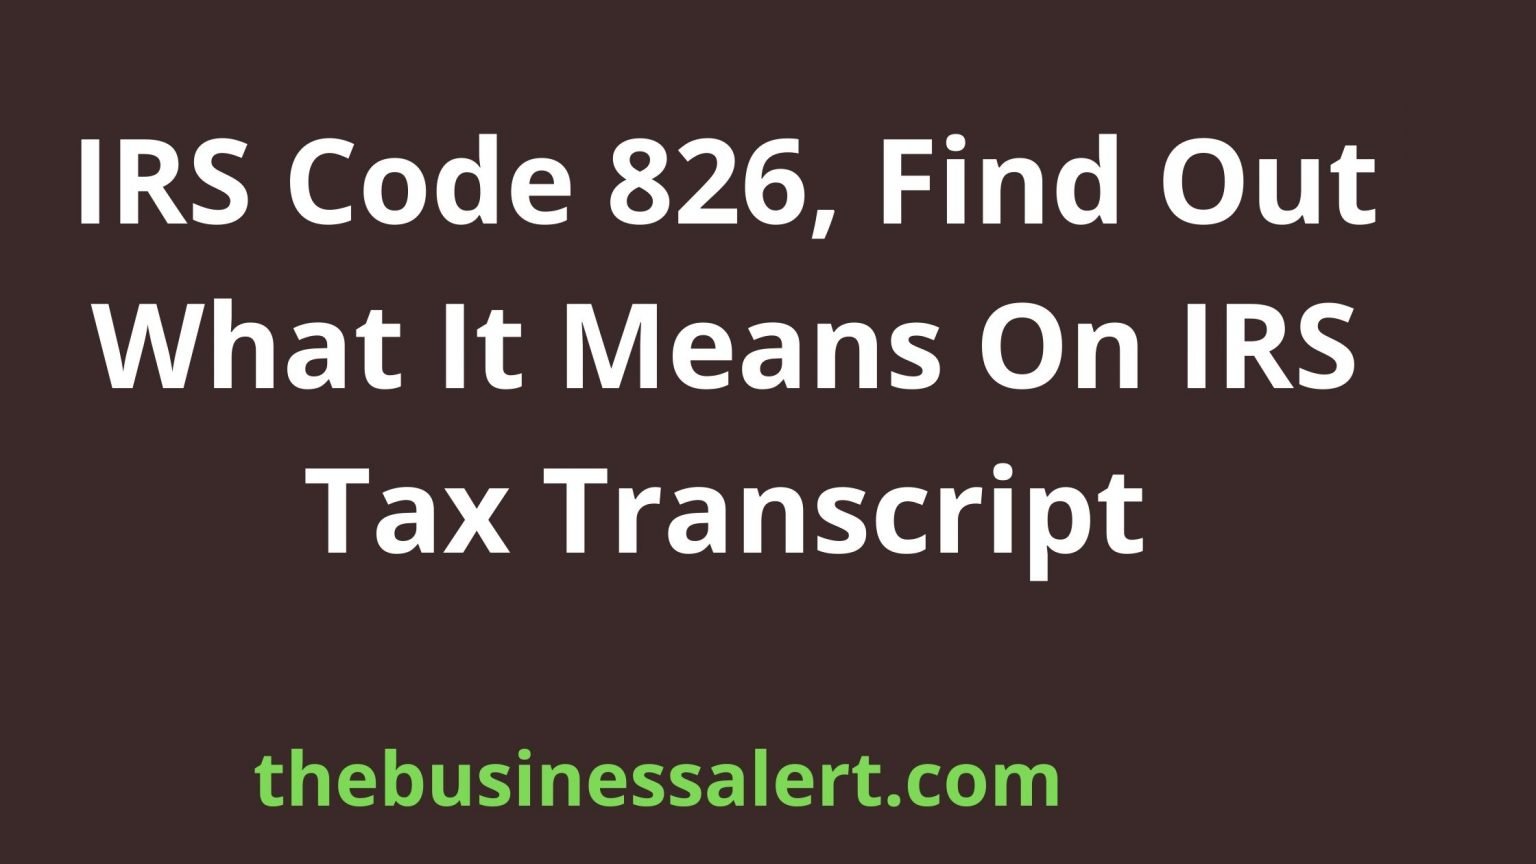 IRS Code 826, Find Out What It Means On IRS Tax Transcript 2022/2023